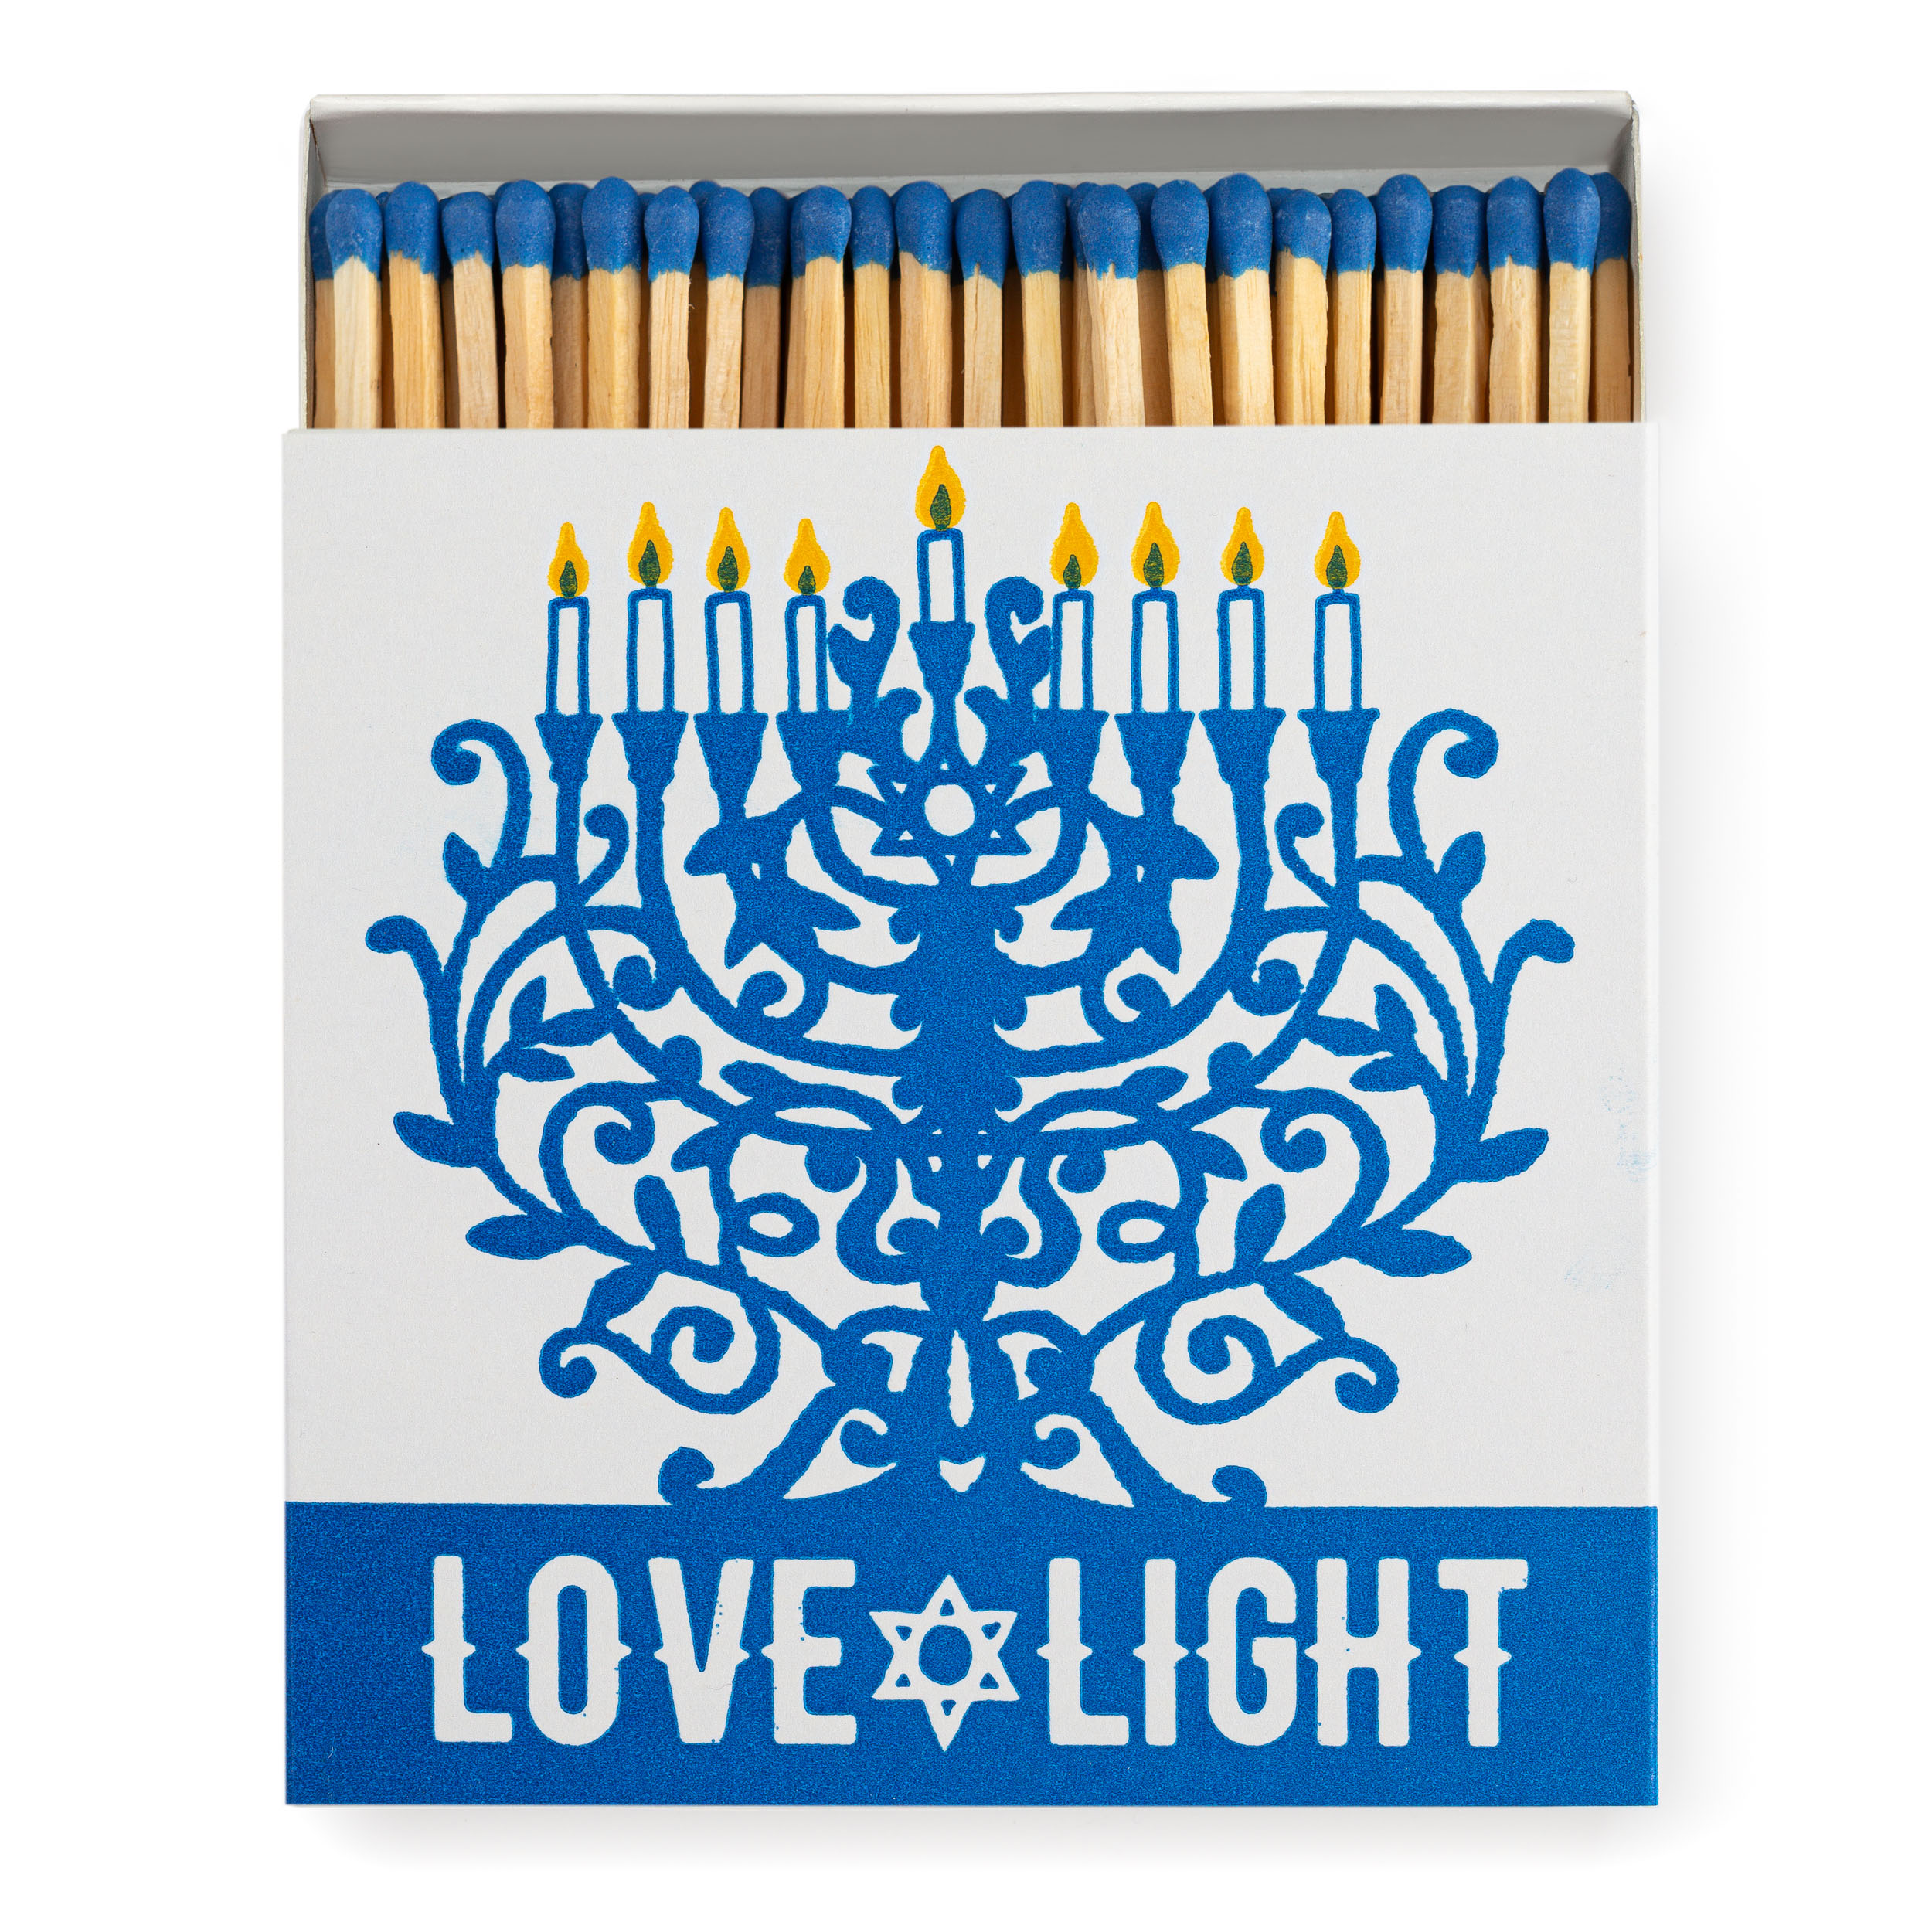 Hannukah - Square Matchboxes - from Archivist Gallery 